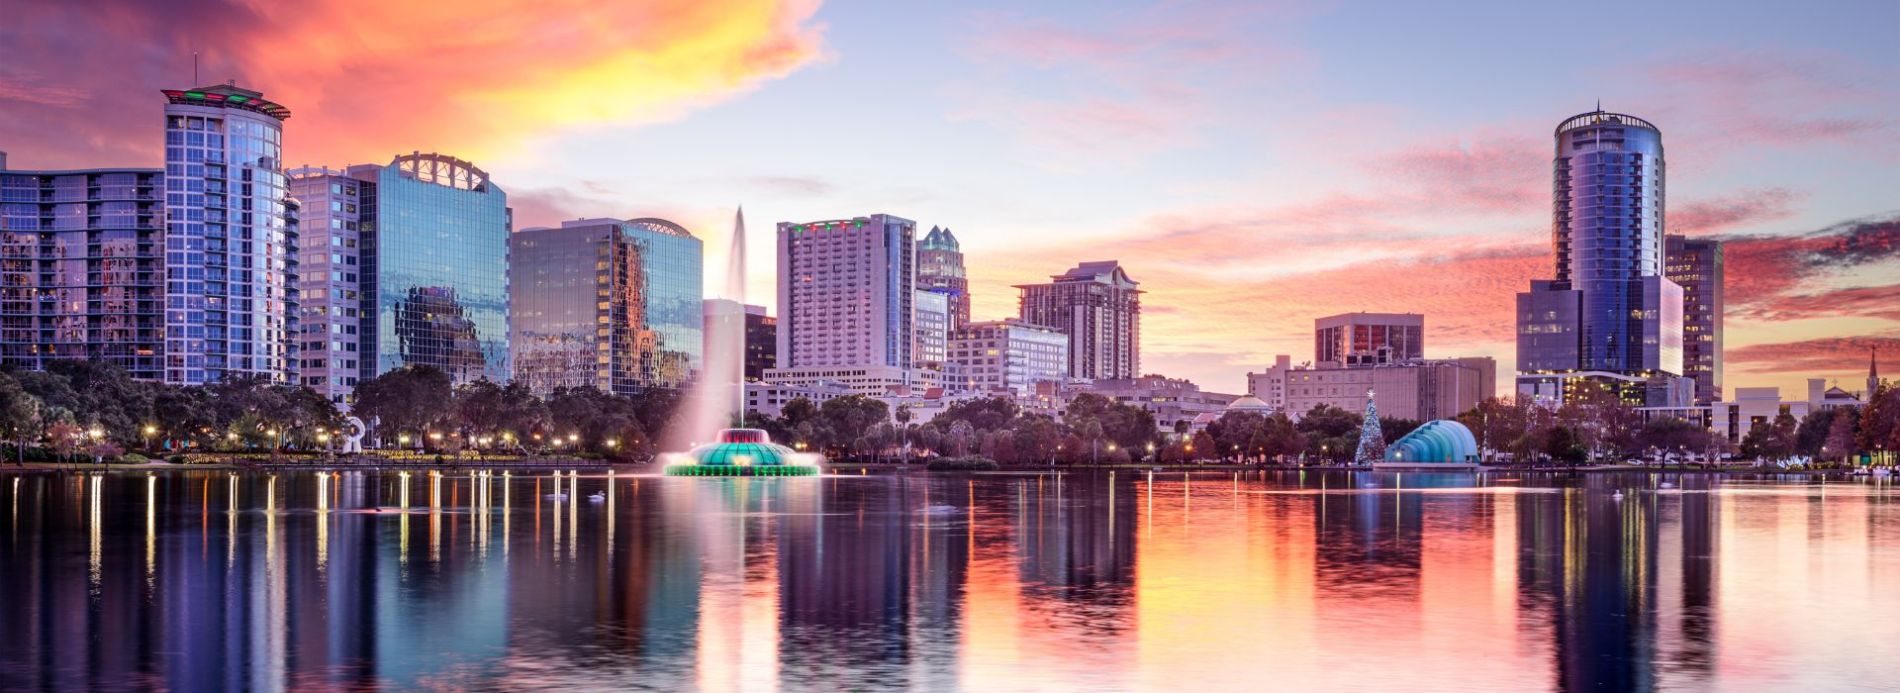 How to Plan For Weather in Orlando, FL Feature Image